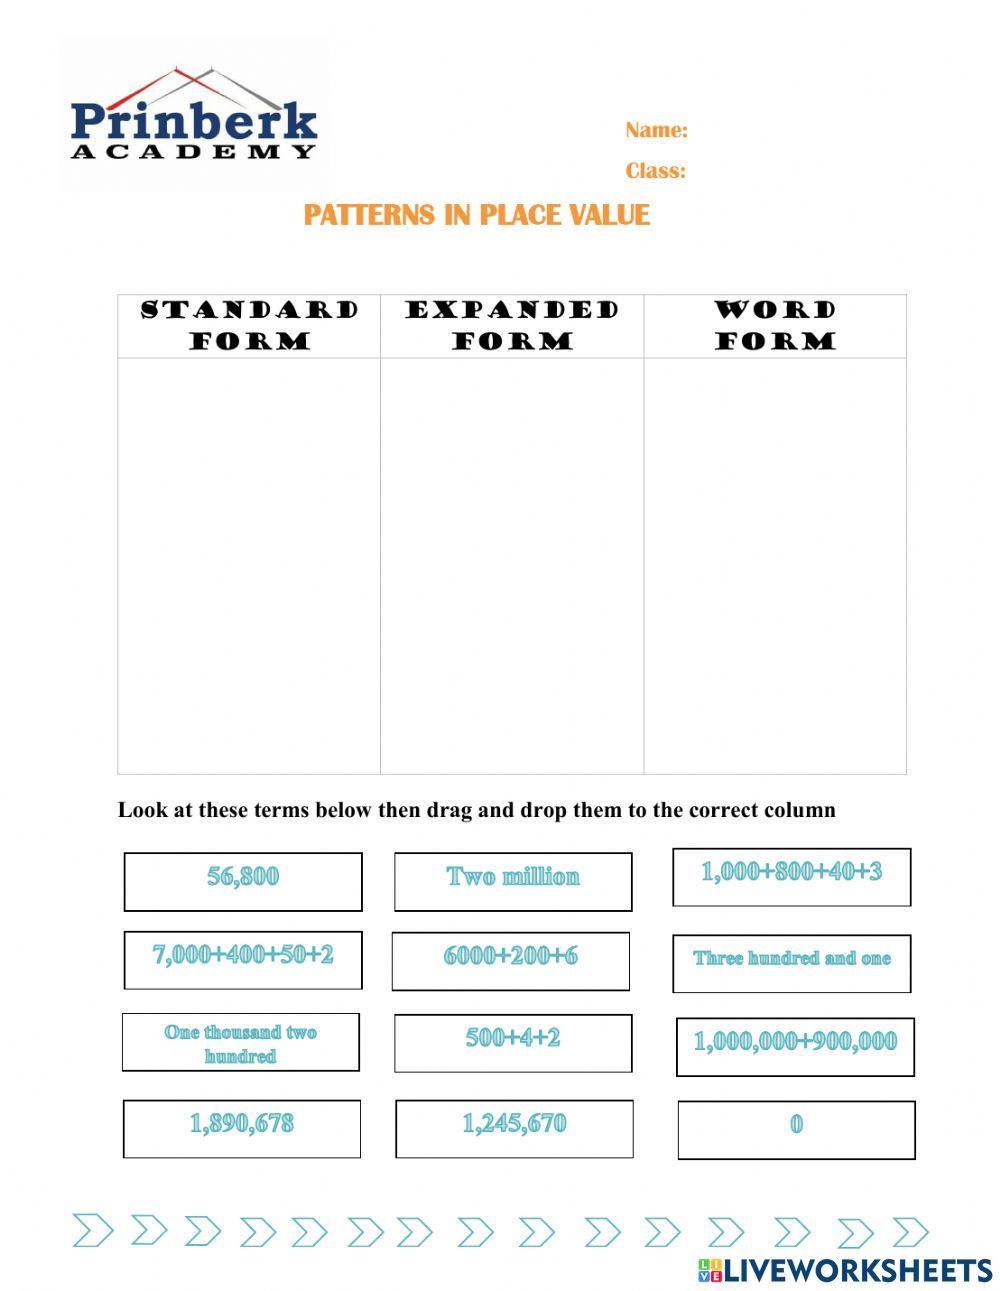 Pattern in place value